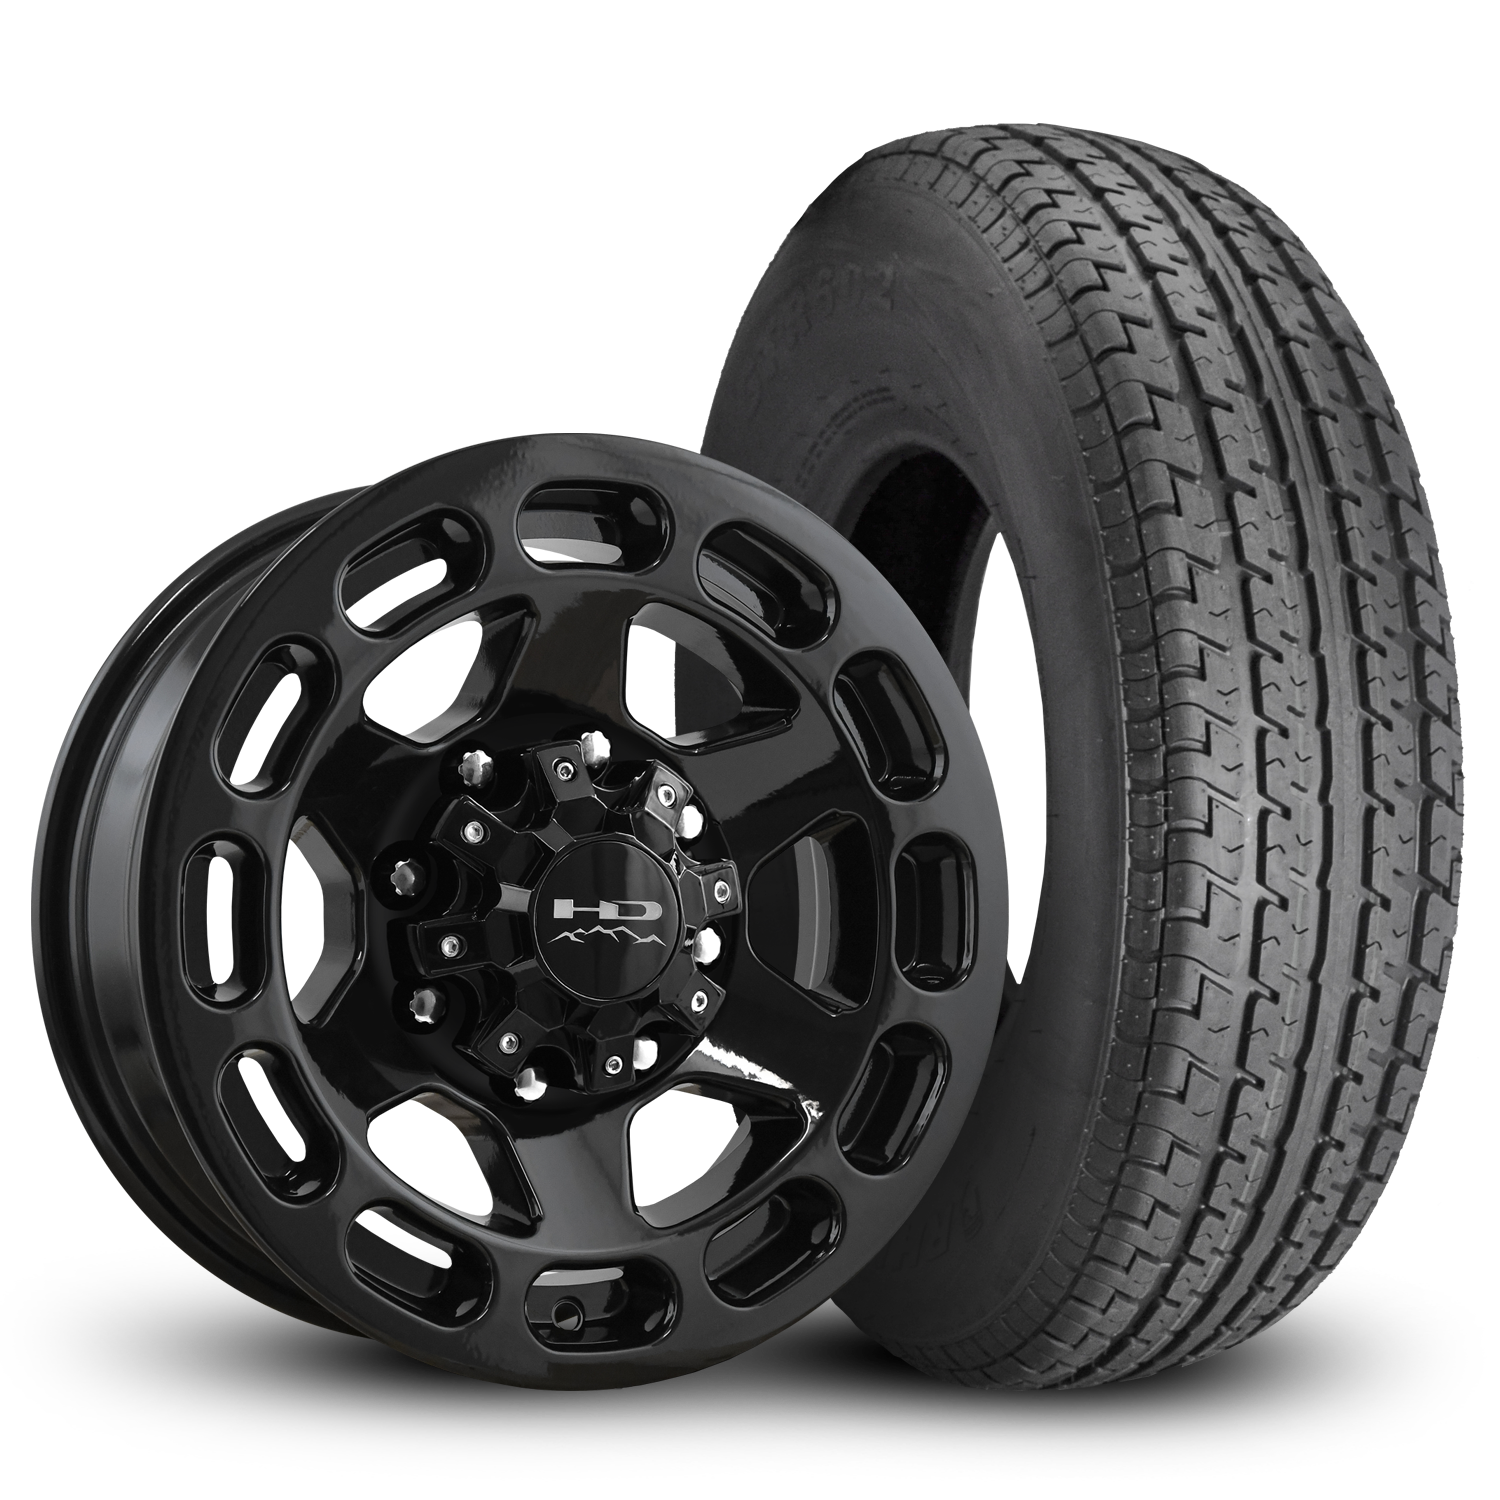 HD Off-Road Patriot Custom Trailer Wheel & Tire packages in 16x6.0 in 8 lug All Gloss Black for Unility, Boat, Car, Construction, Horse, & RV